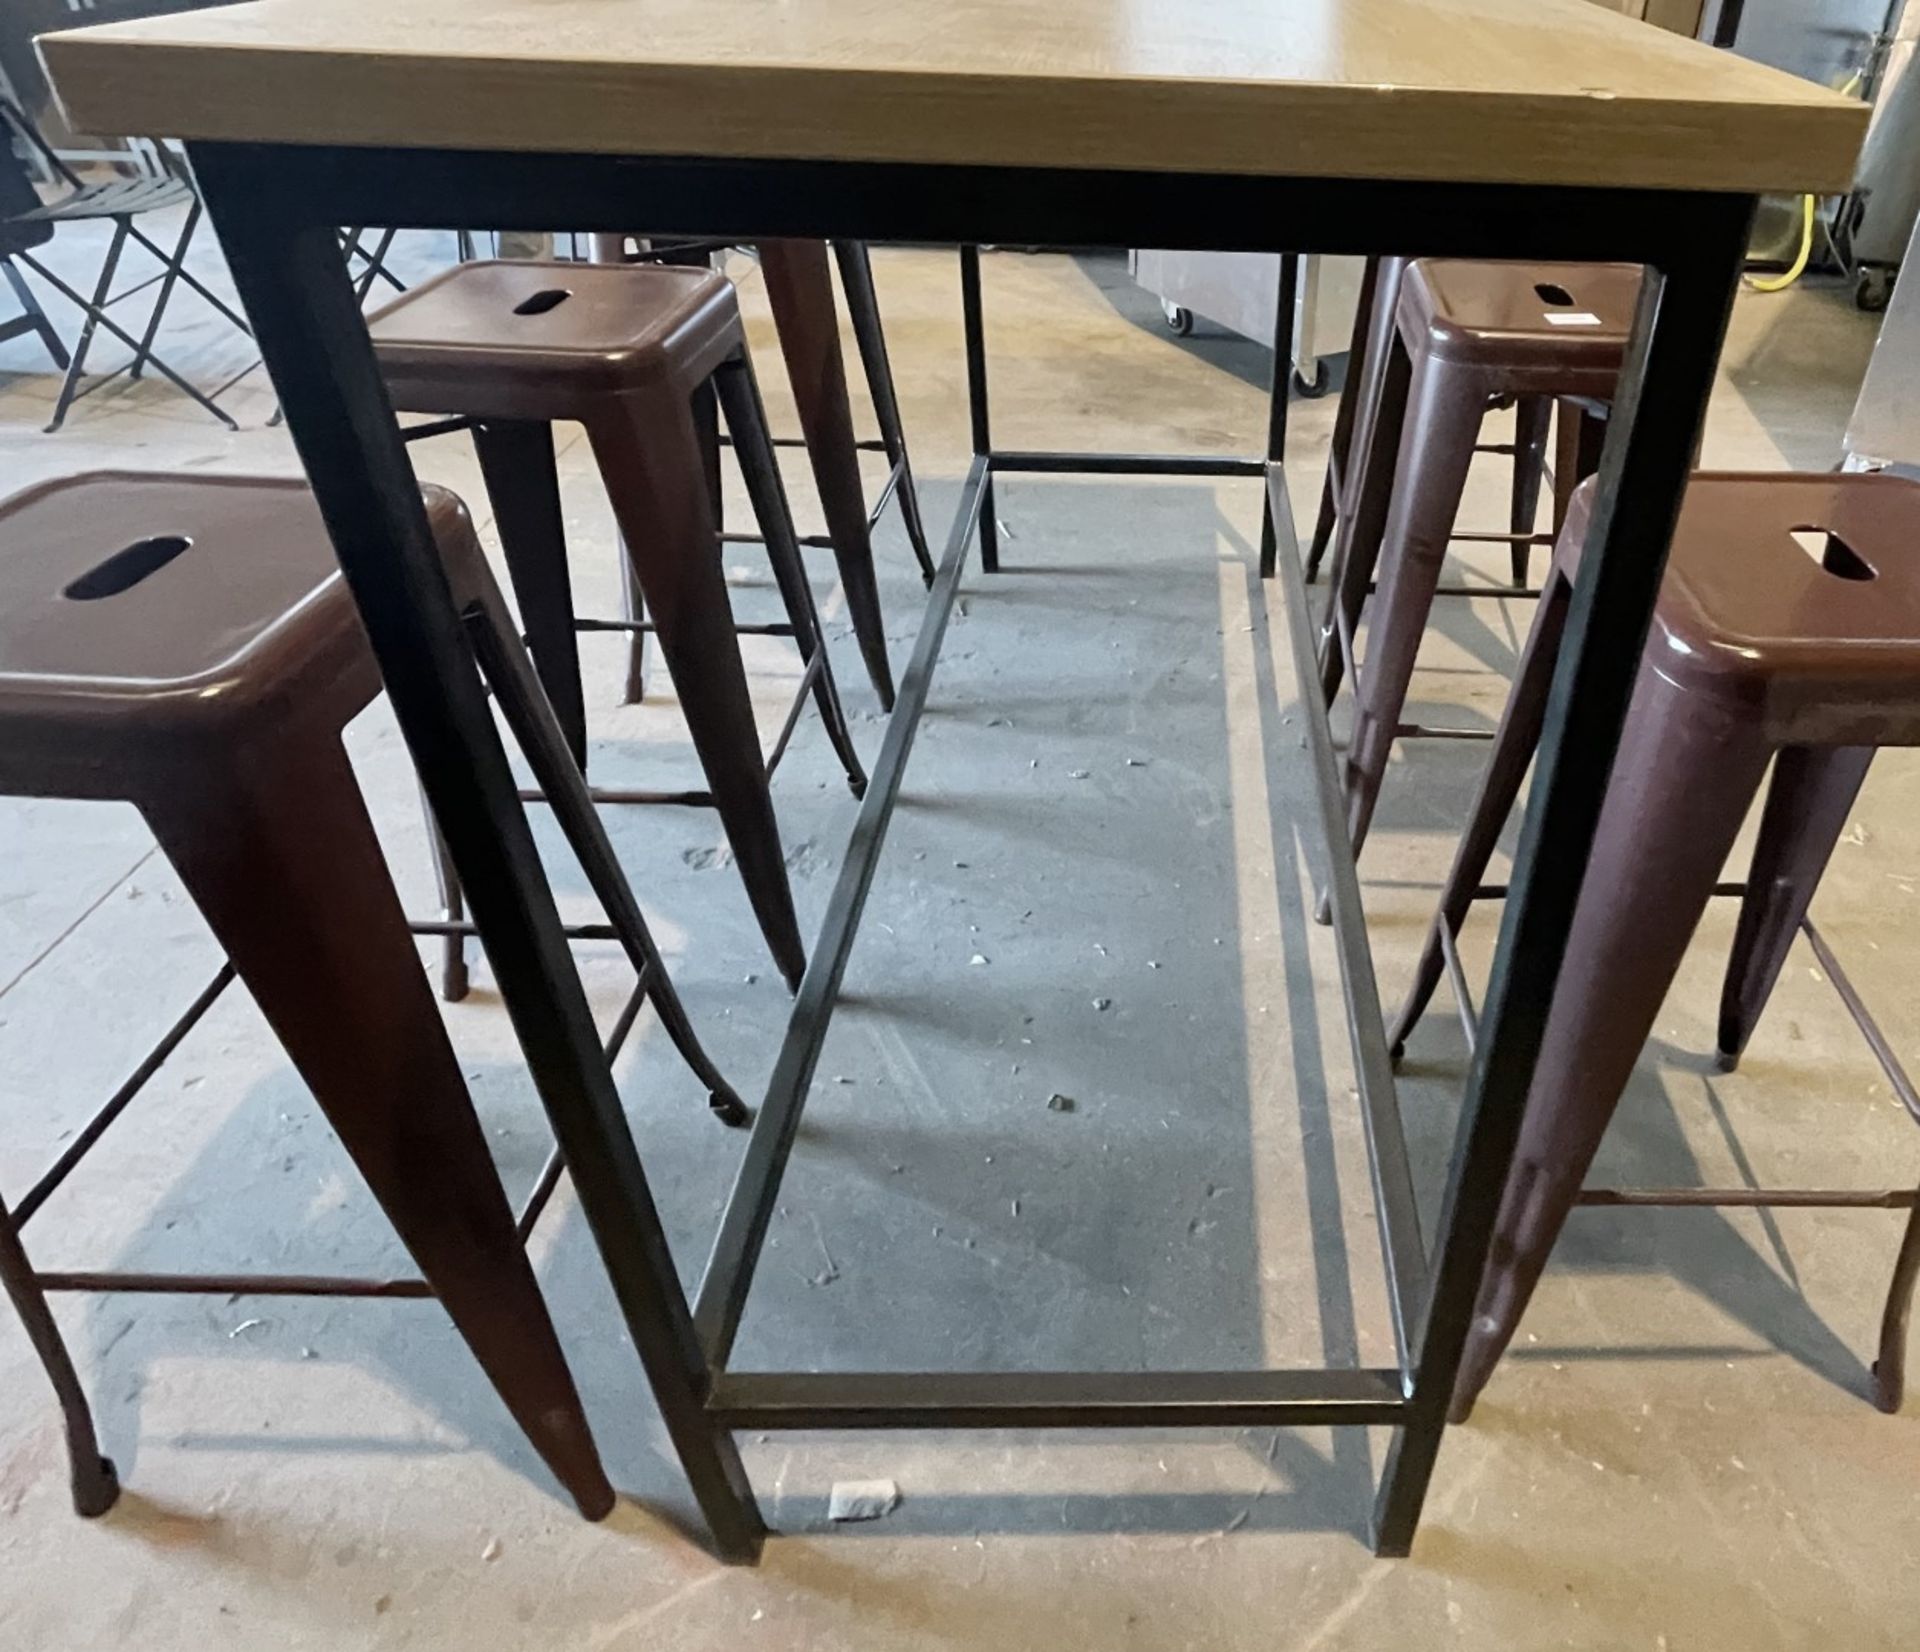 1 x Rectangular Bar Table And 6 x Metal Bar Stools - Ref: FGN068 - CL834 - Location: Essex, RM19 Dim - Image 8 of 9